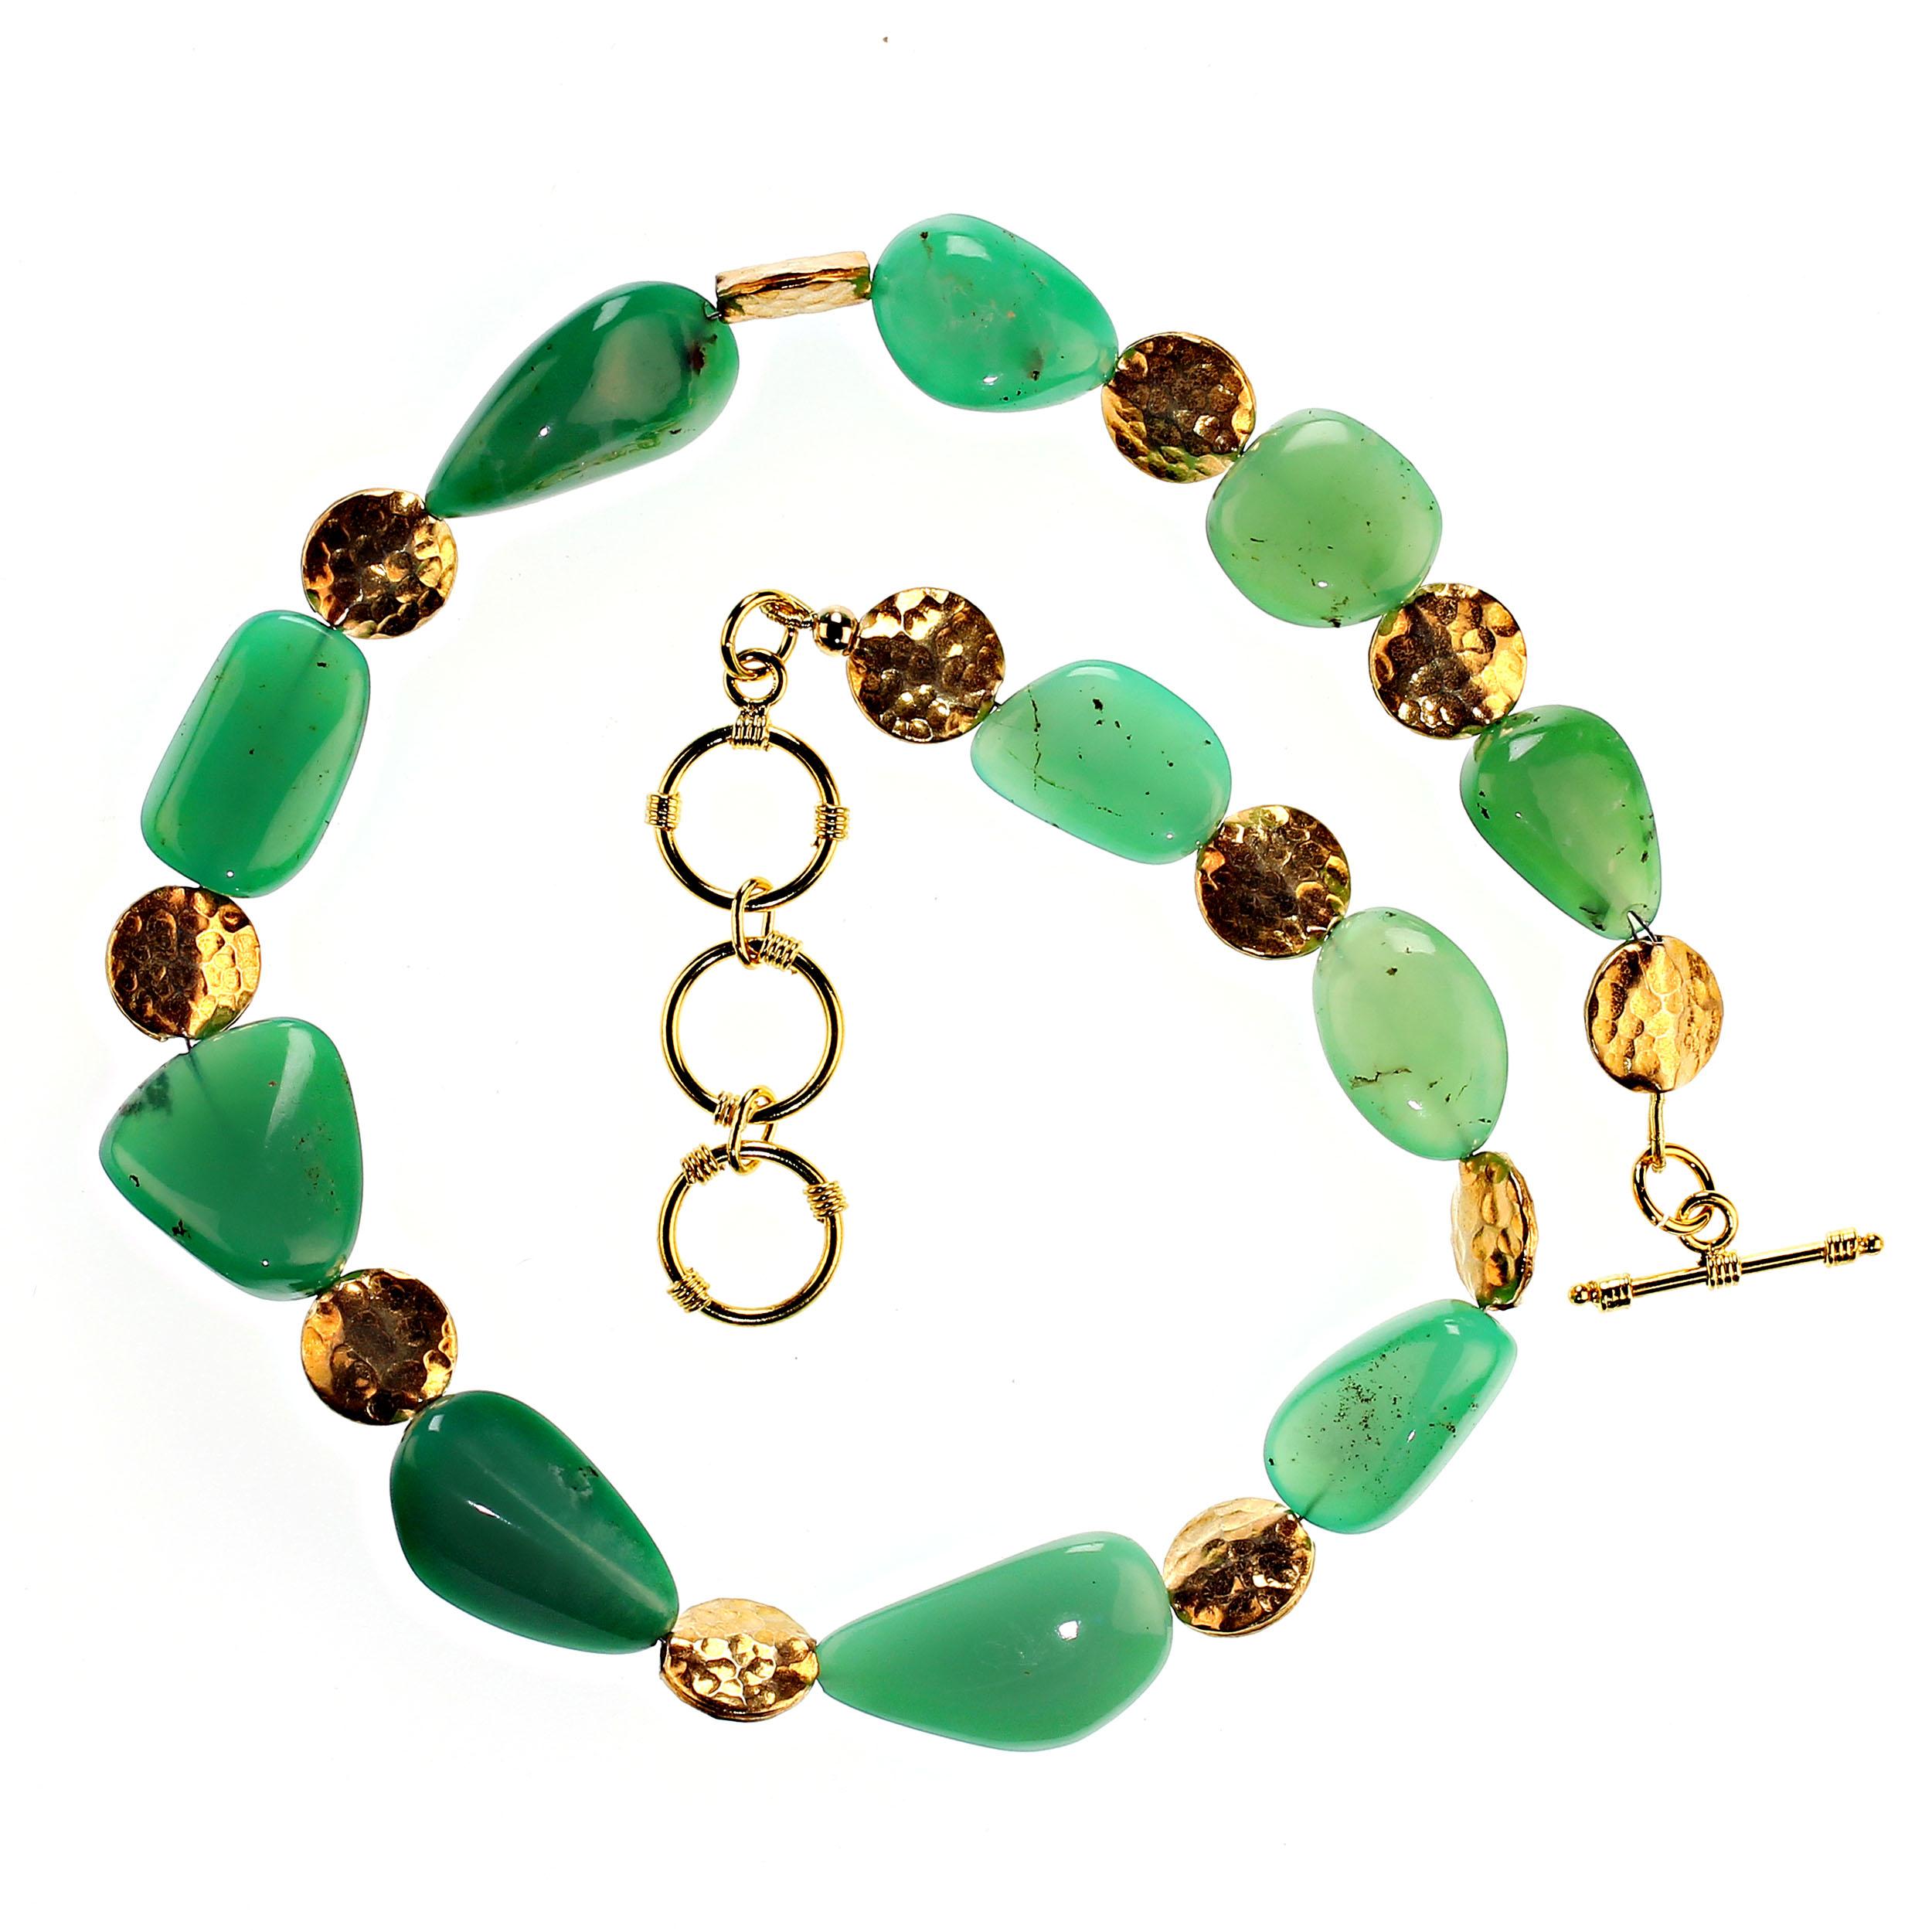 Artist AJD 18 Inch Magnificent Chrysoprase Nugget Necklace with goldy accents For Sale